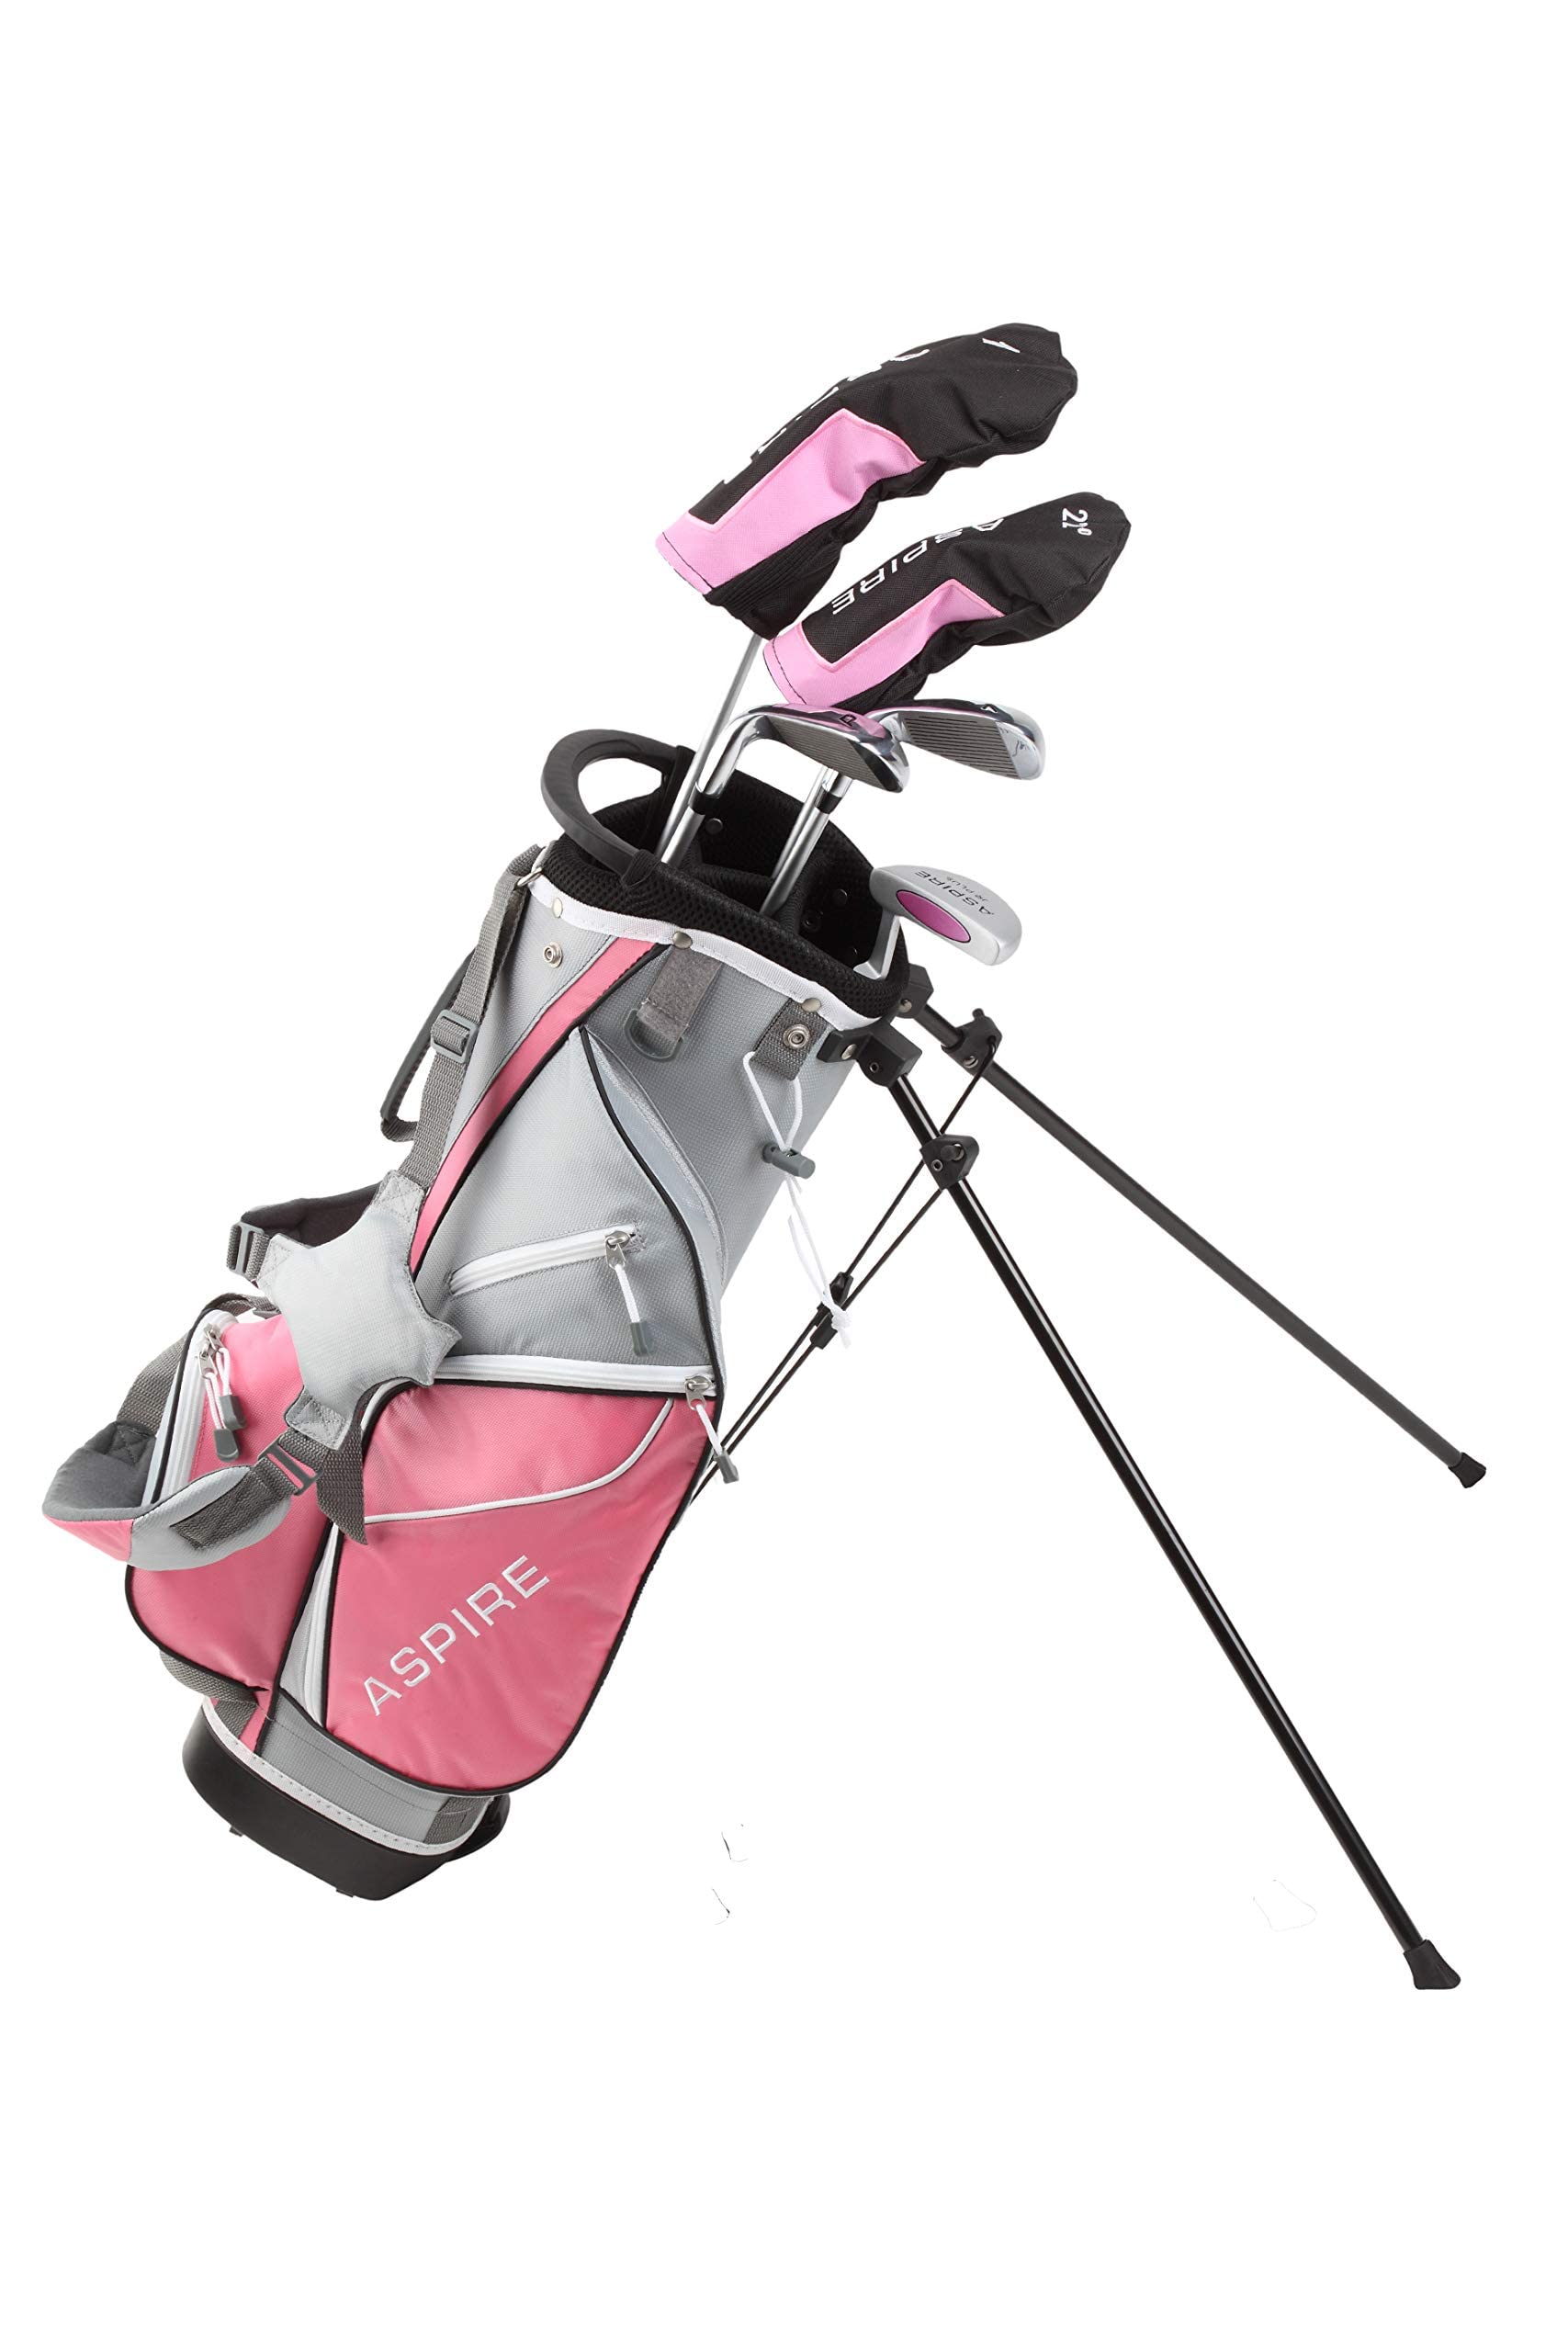 Aspire Junior Plus Complete Golf Club Set for Children, Kids - 5 Age Groups Boys and Girls - Right Hand, Real Girls Junior Golf Bag, Kids Golf Clubs Set